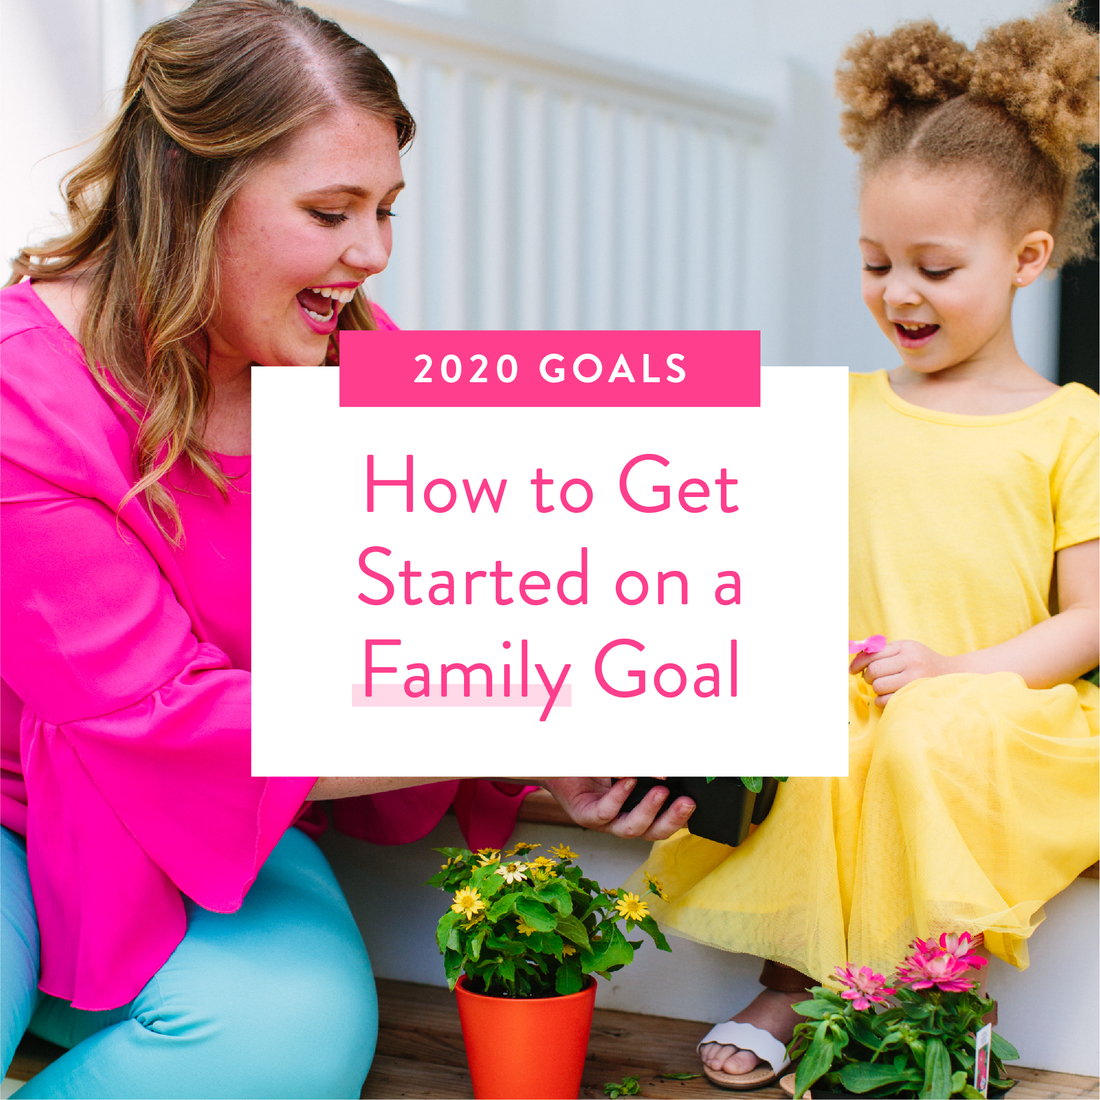 How to Get Started on a Family Goal